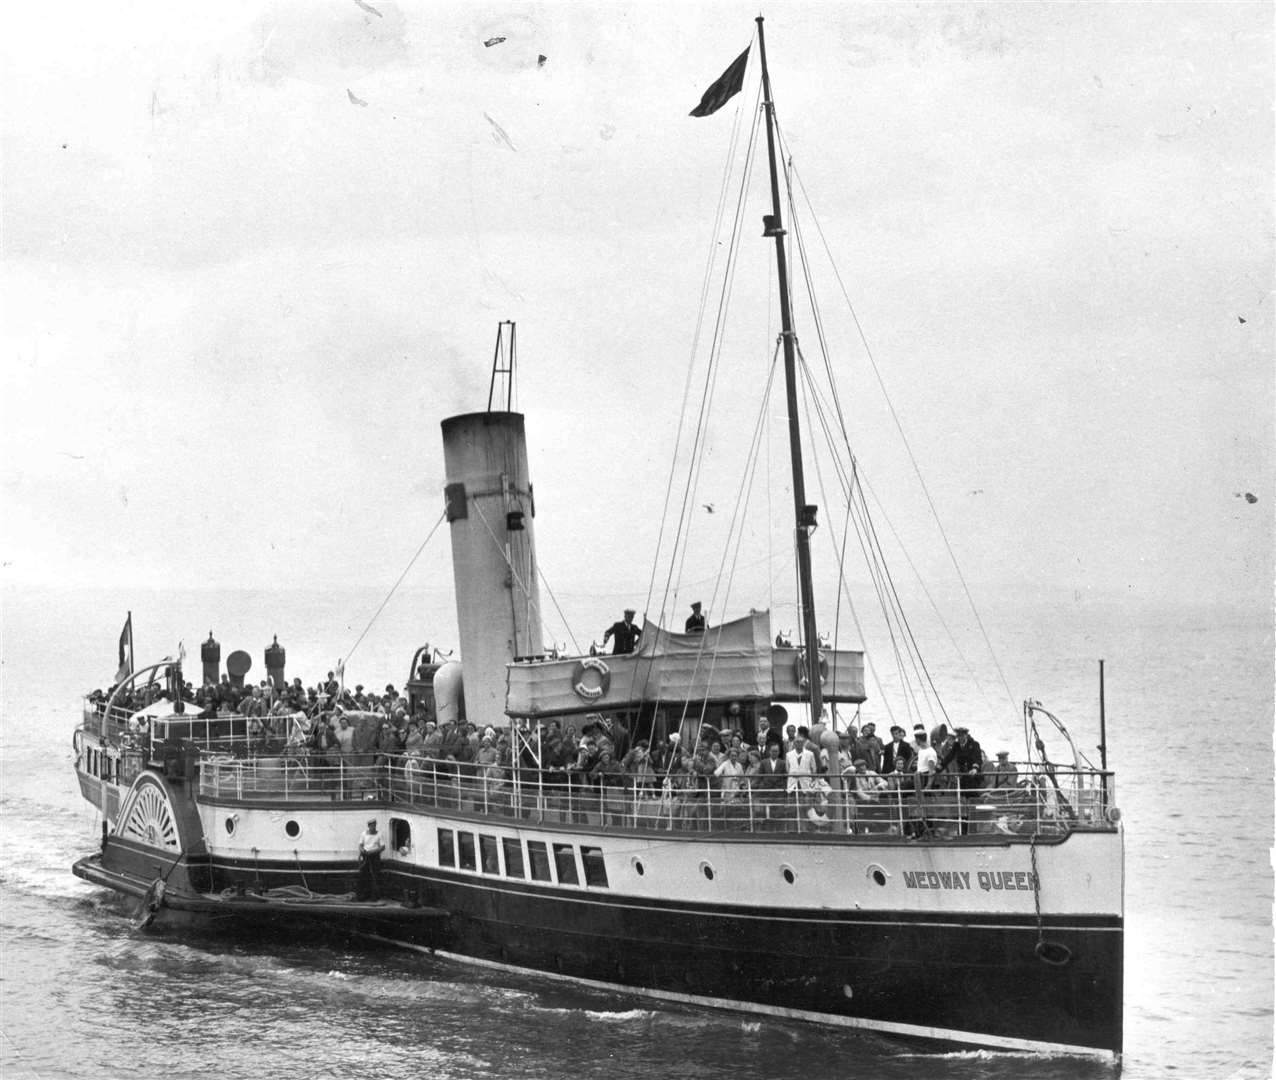 The Medway Queen paddle steamer regularly ferried holidaymakers between Strood, Southend and Herne Bay Pic: Images of Medway